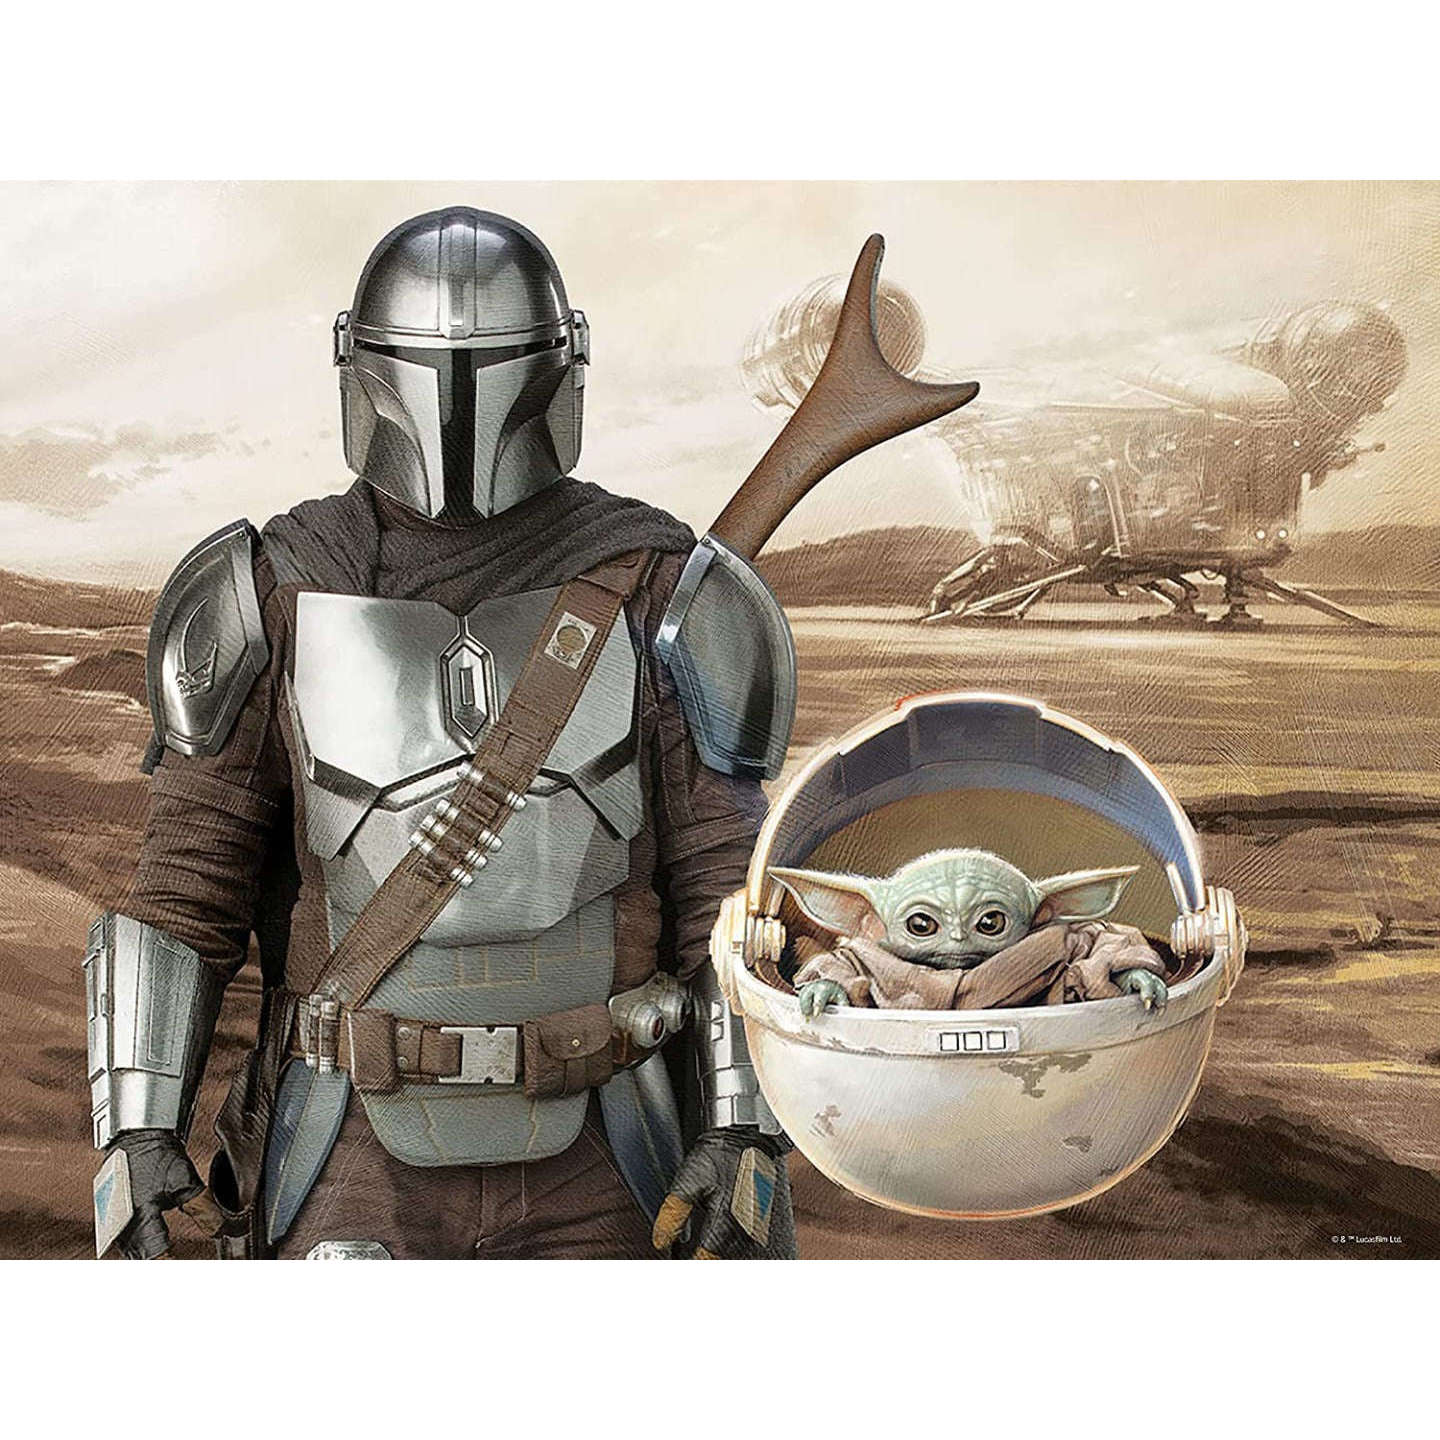 Toys N Tuck:Star Wars The Mandalorian 3D Puzzle 500pc - Mando and Grogu,Star Wars The Mandalorian